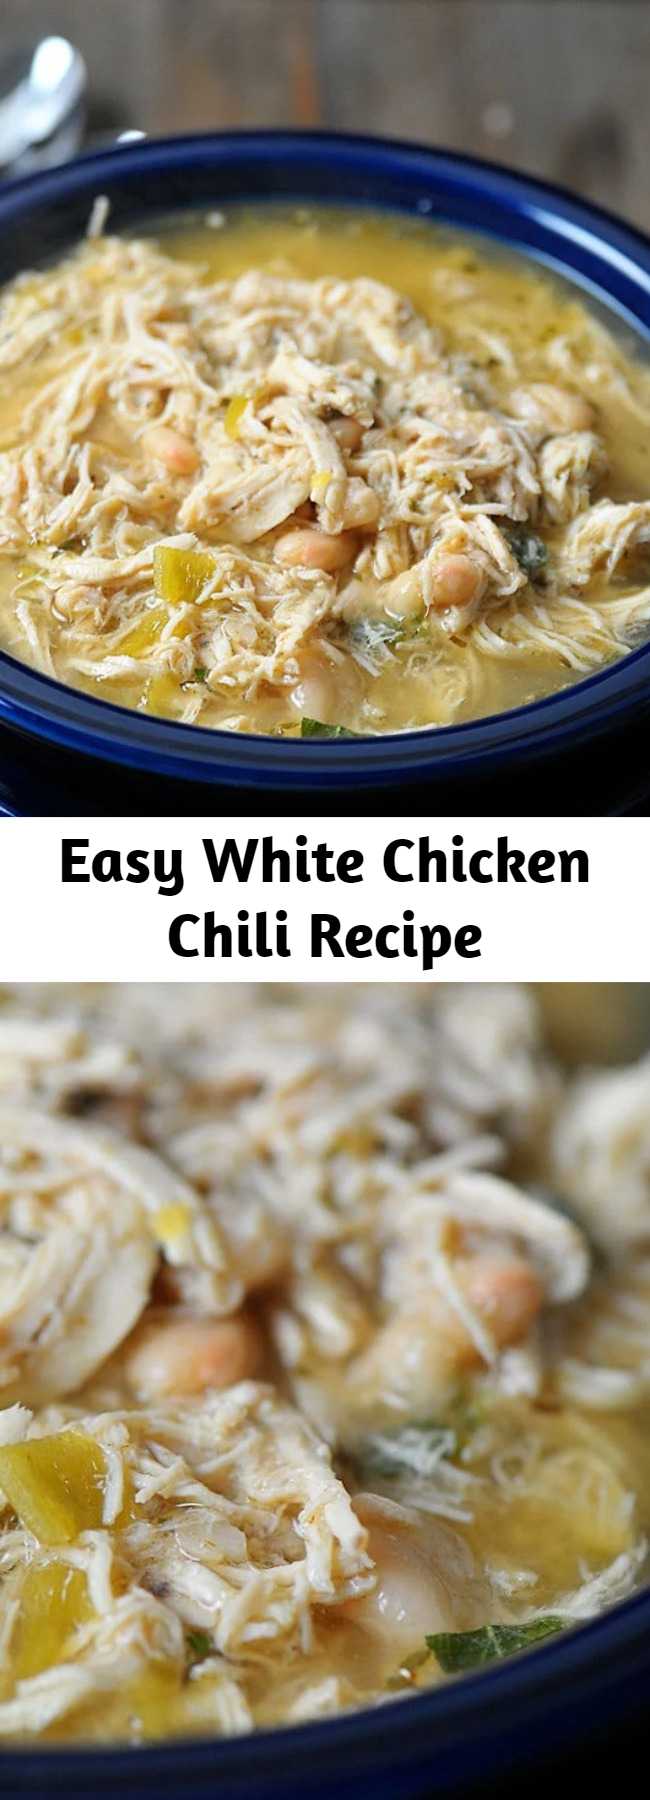 Easy White Chicken Chili Recipe - This White Chicken Chili recipe makes a delicious meal full of spicy chili flavor, chicken and white beans. You’ll love the ease of this stovetop, slow cooker and Instant Pot White Chicken Chili!